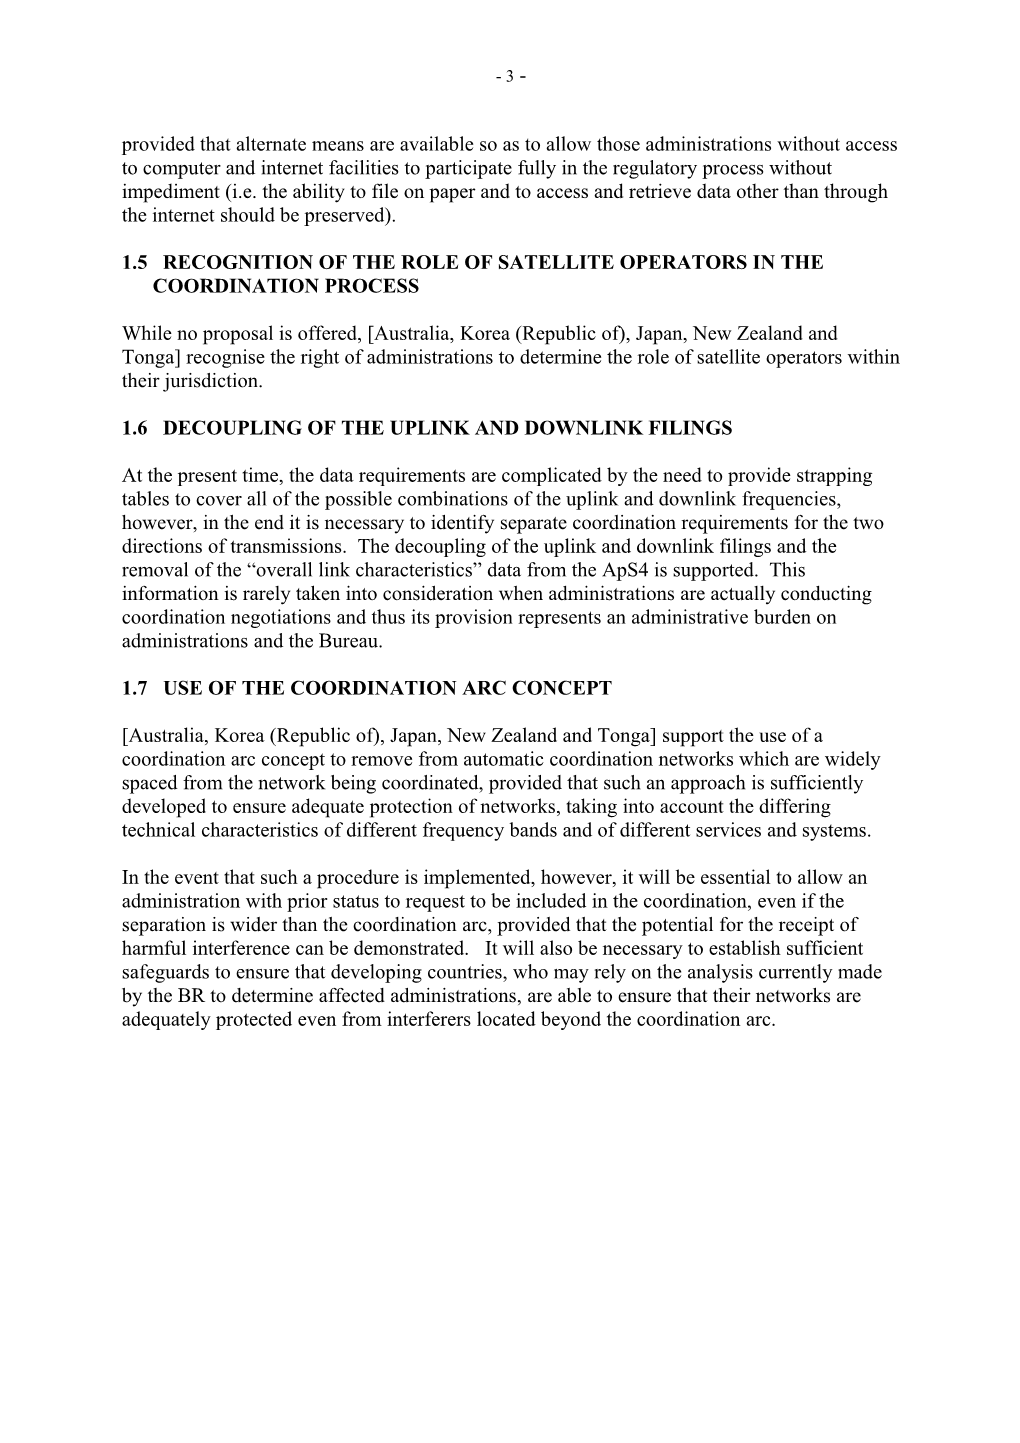 Regulatory Issues and Other Matters (Agenda Items 1, 2 and 4)